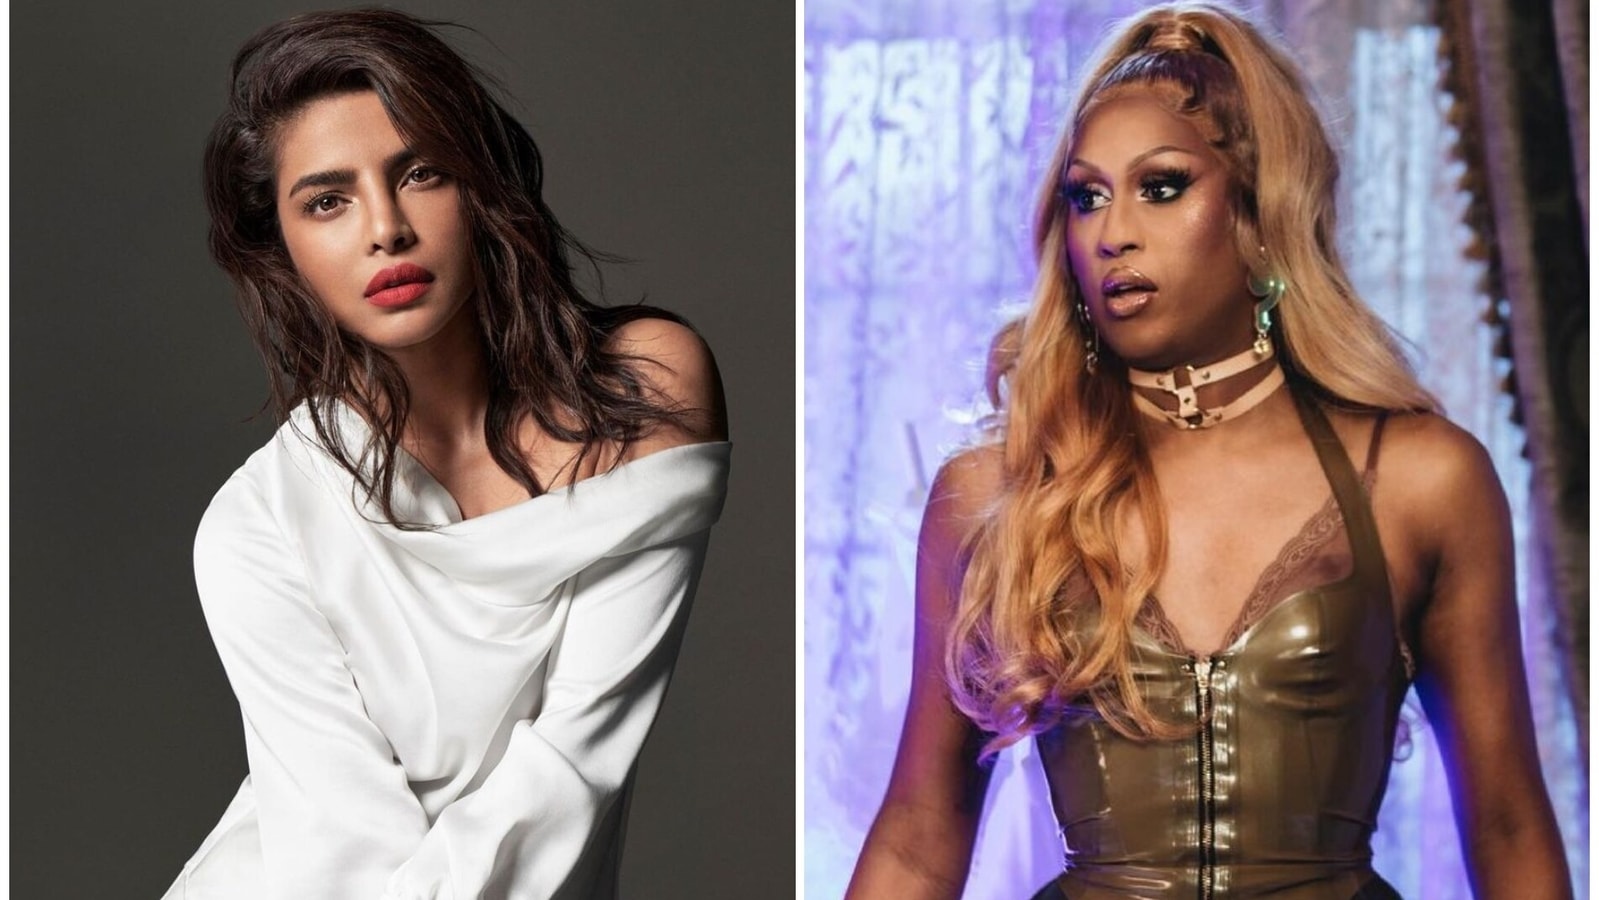 Chopra Xx Video - Priyanka Chopra gives shout-out to drag star Queen Priyanka for 'absolutely  stunning' magazine cover | Bollywood - Hindustan Times